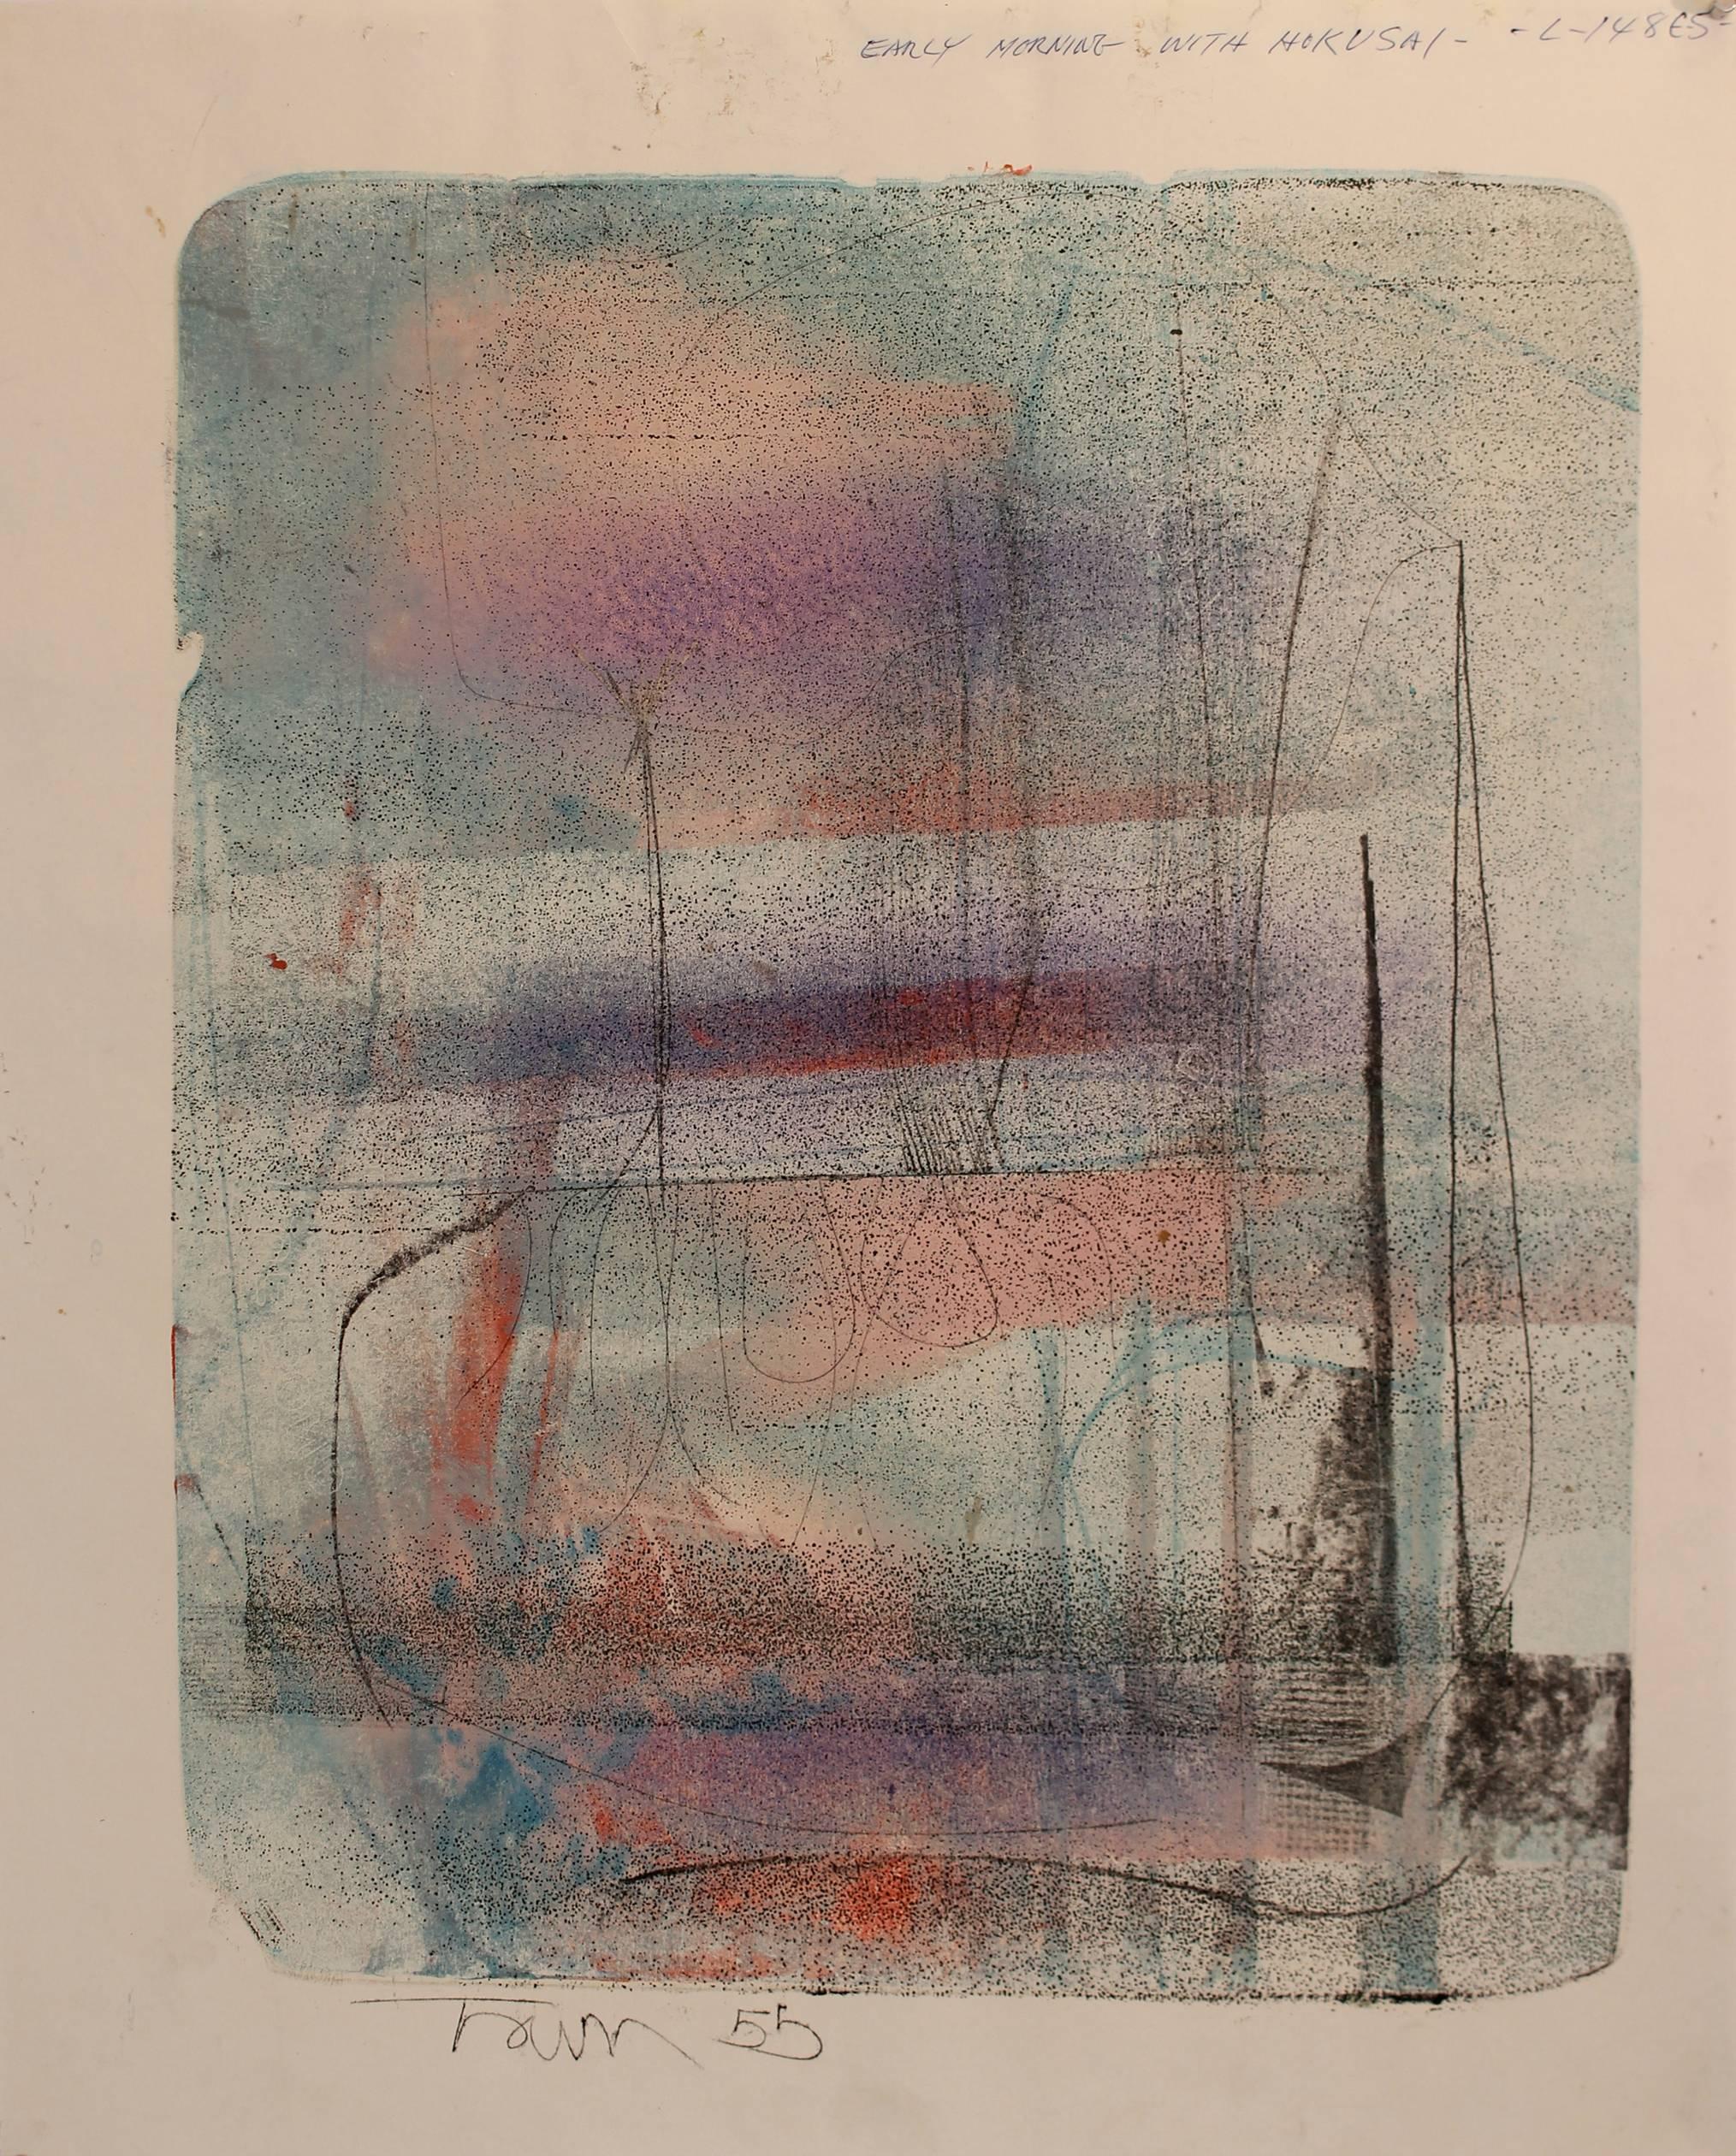 Harold Town Abstract Print - Early Morning with Hokusai, abstract monoprint (Single Autographic Print)